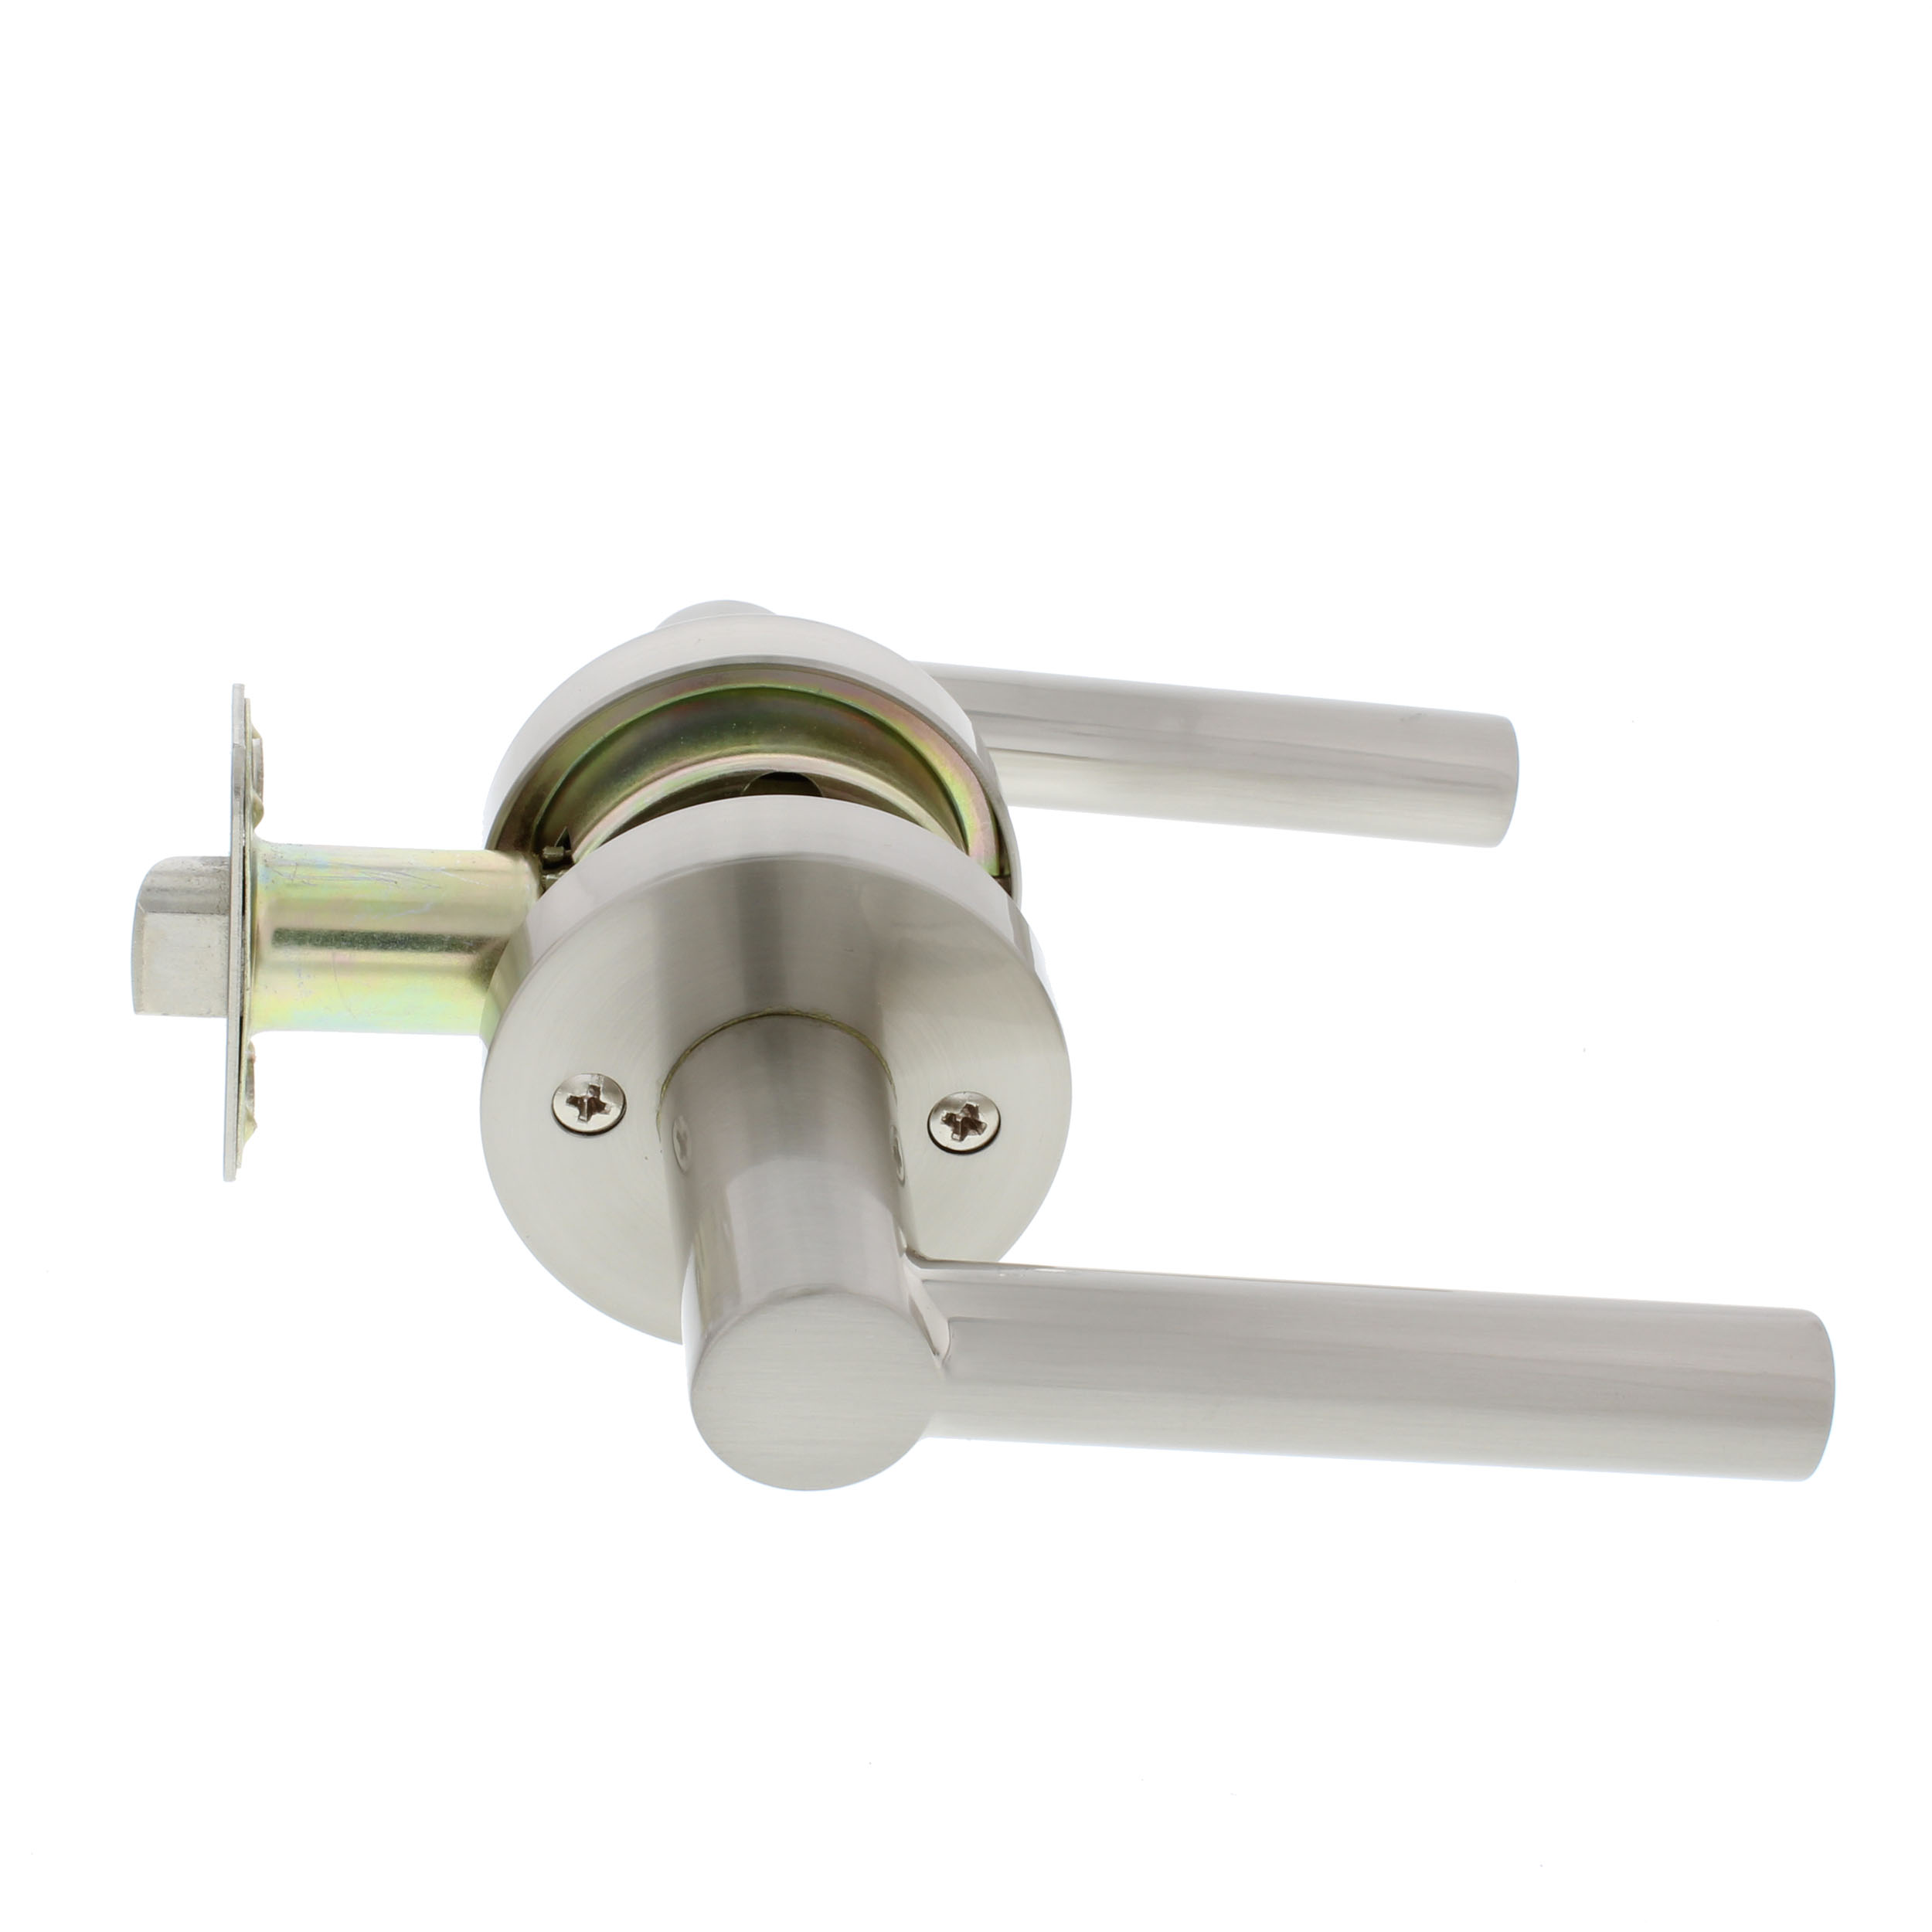 Ultra Security Windsor Hall/Closet Passage Round Rod Door Lever- Passage Lock Lever, Hall and Closet Lever (Satin Nickel, 1 Pack) - image 4 of 11